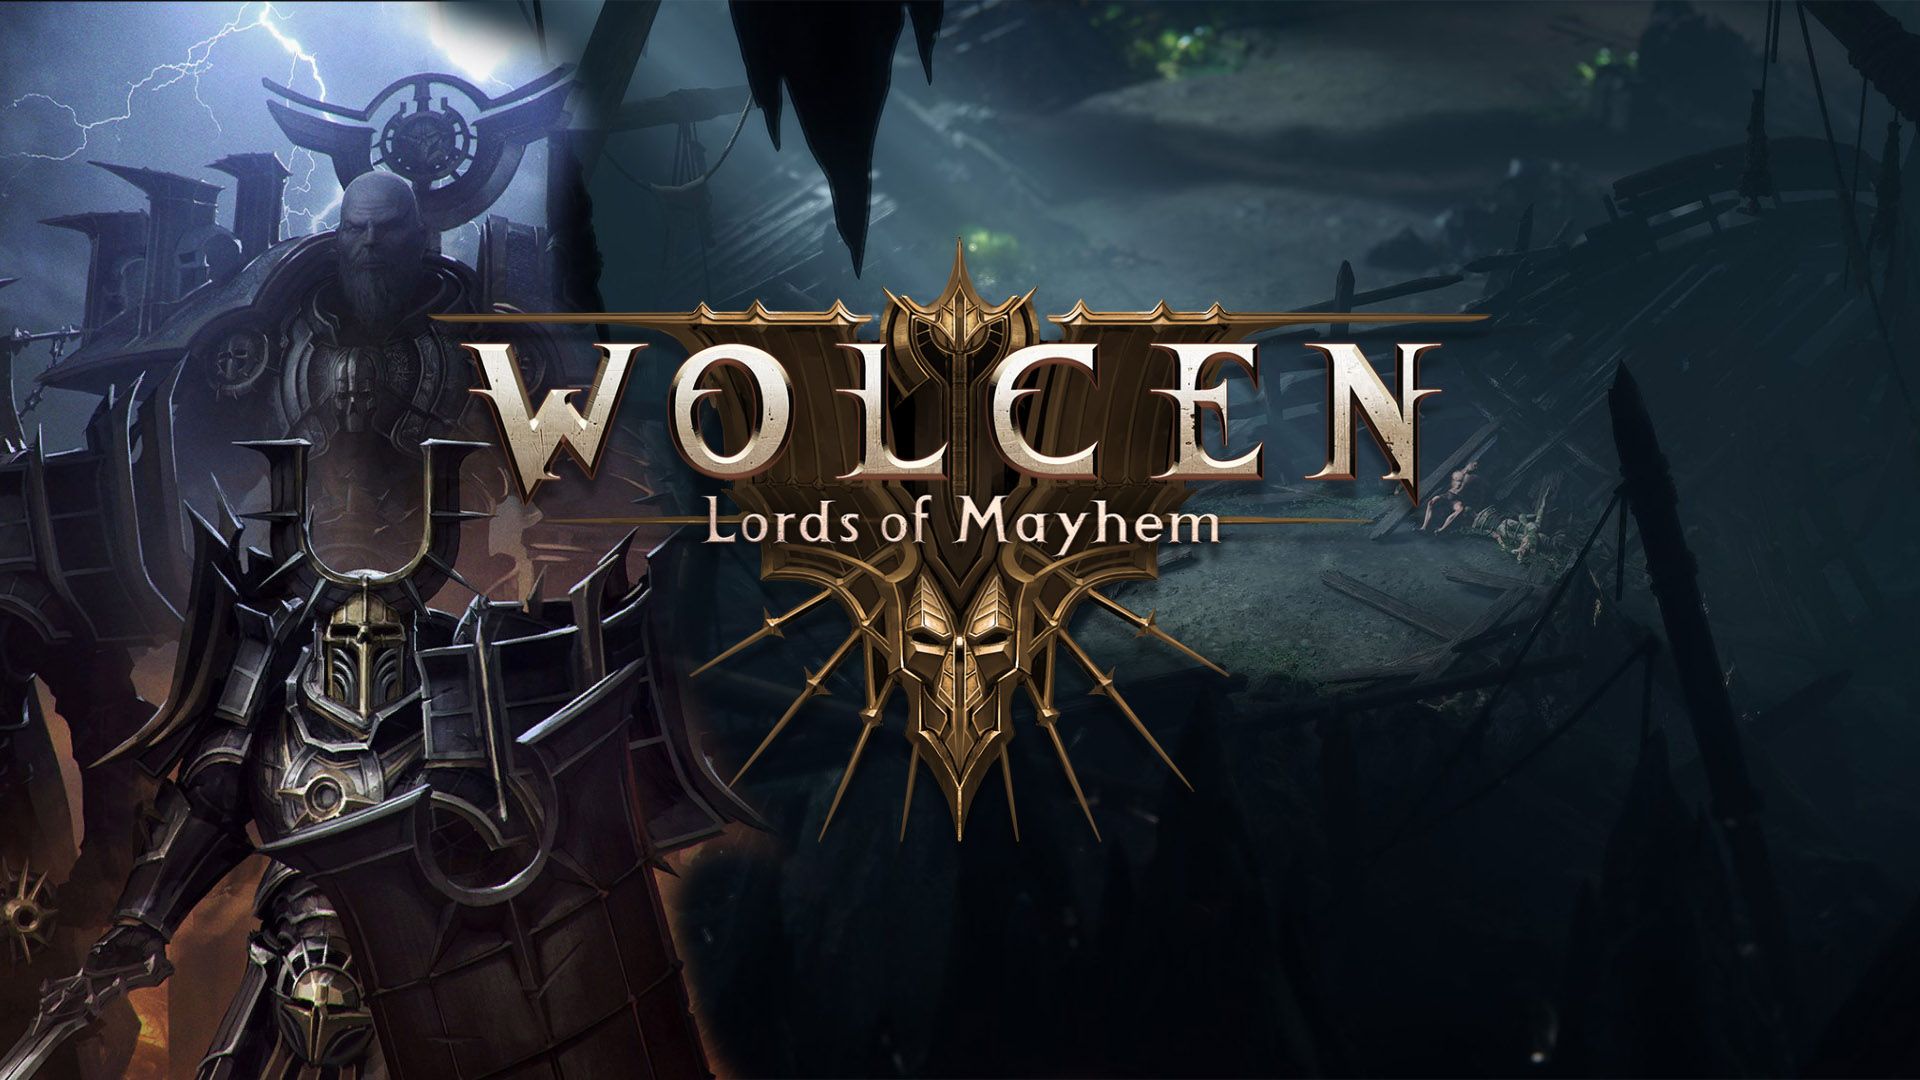 download the new version Wolcen: Lords of Mayhem